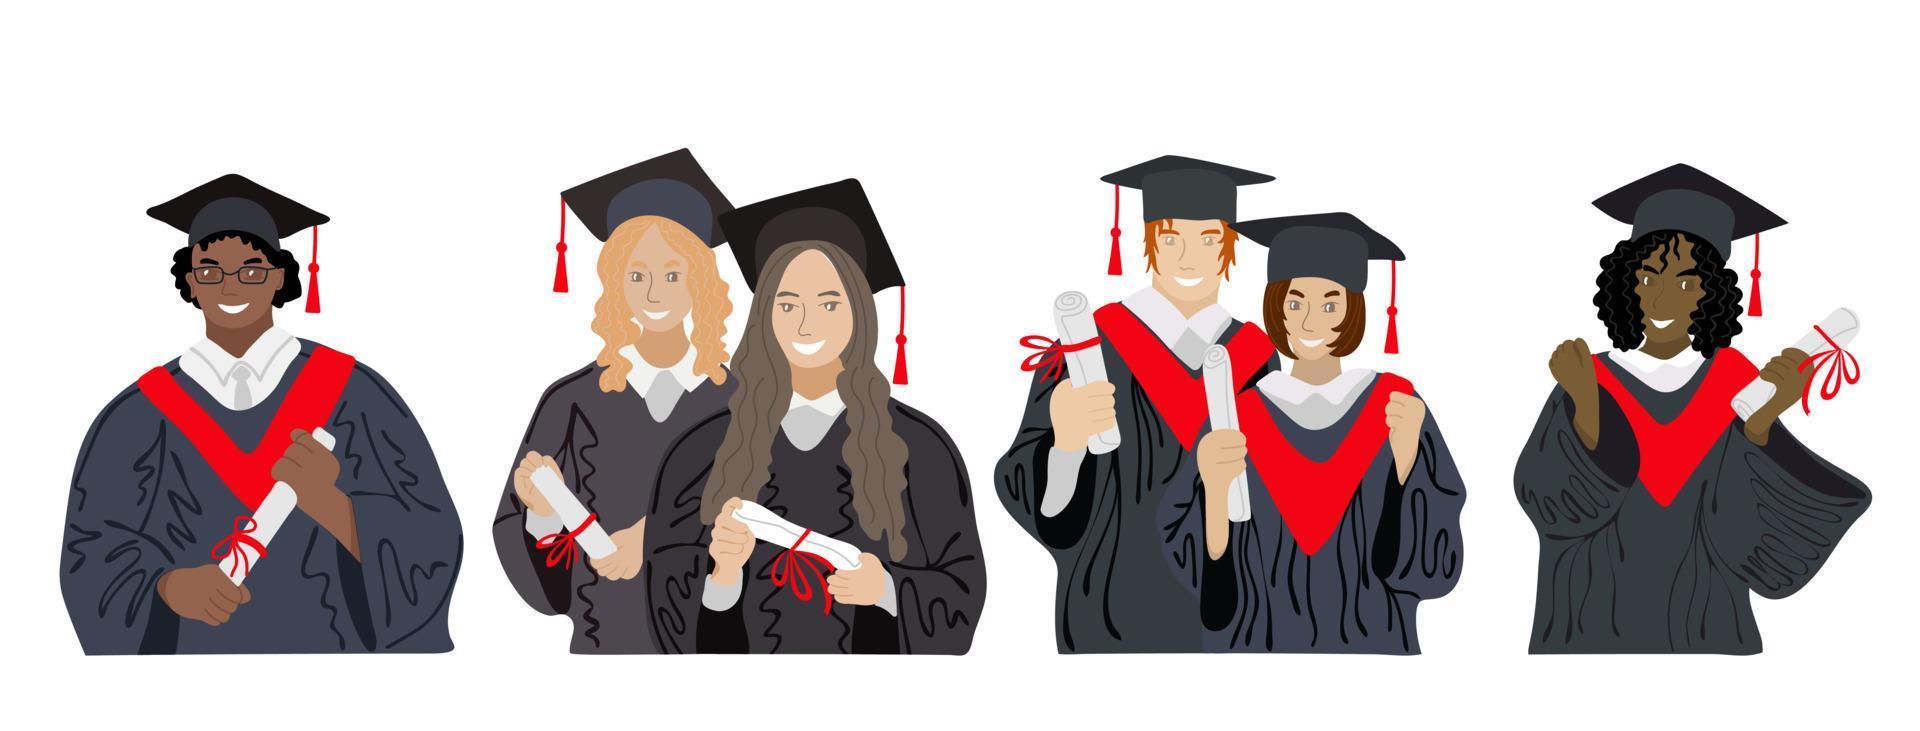 Different ethnic graduated students. Happy students with diplomas wearing academic gown and graduation cap, group with education certificate vector